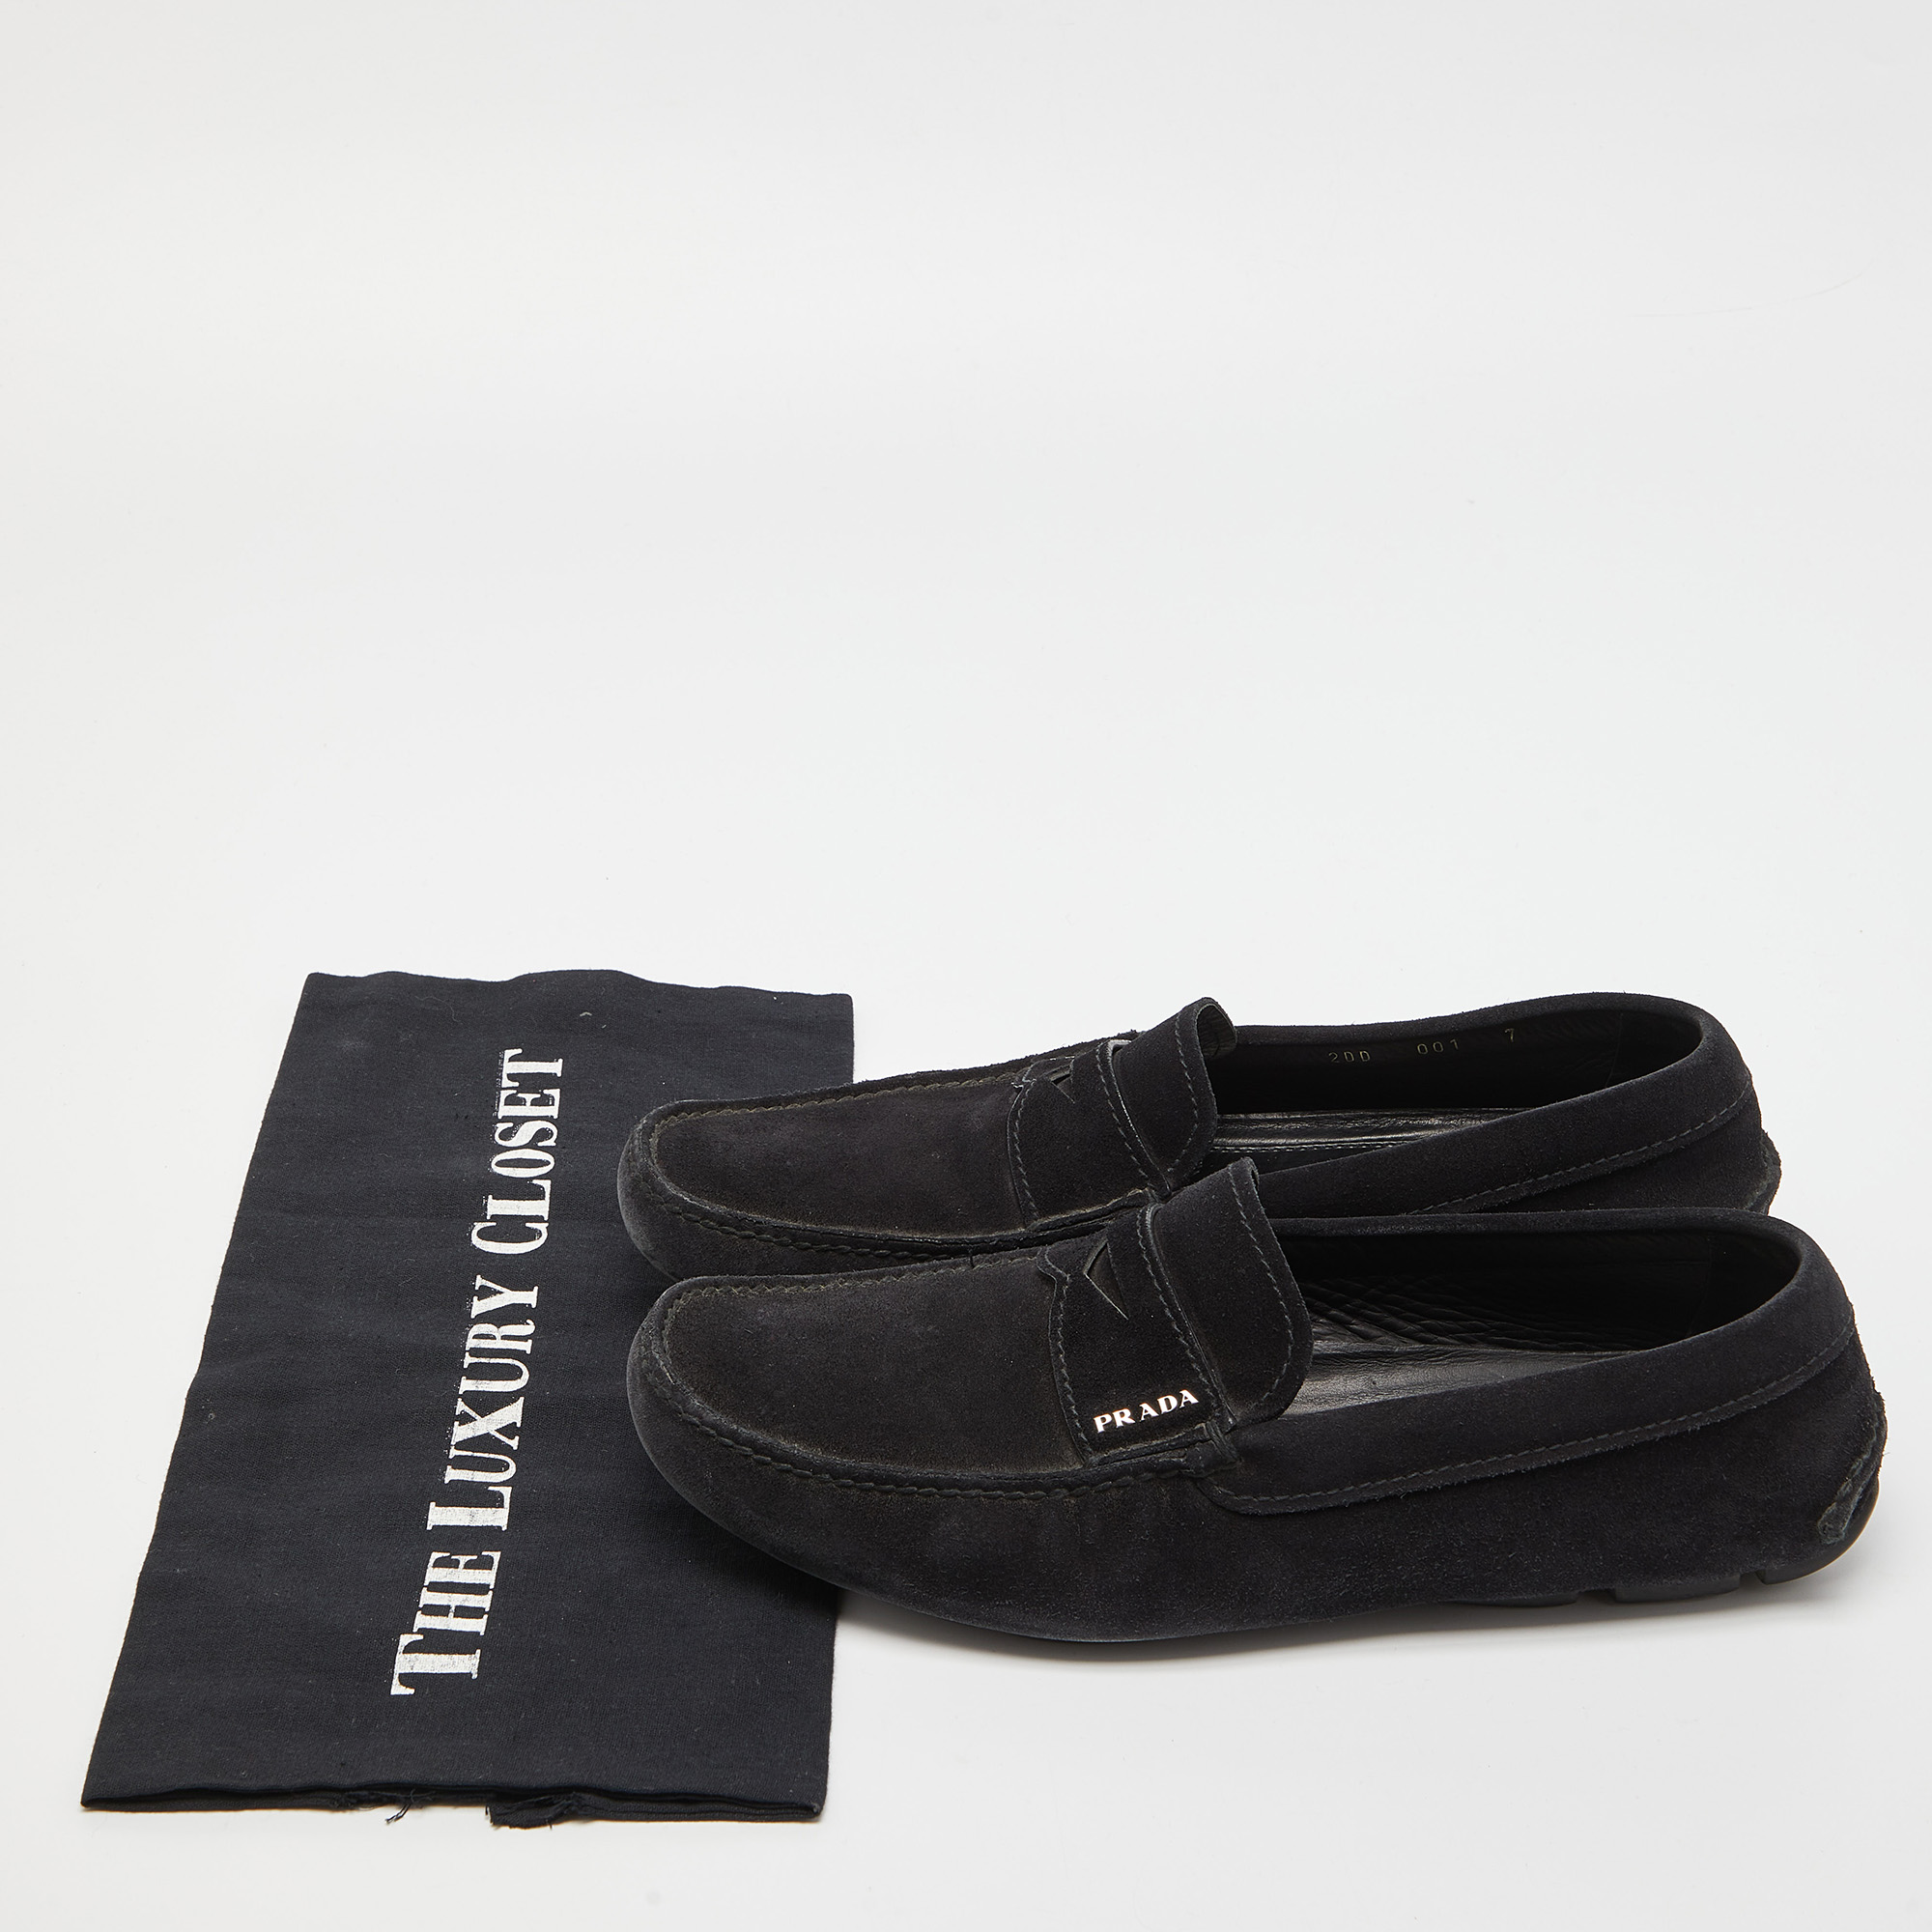 Prada Black Suede Penny Loafers Size 40.5